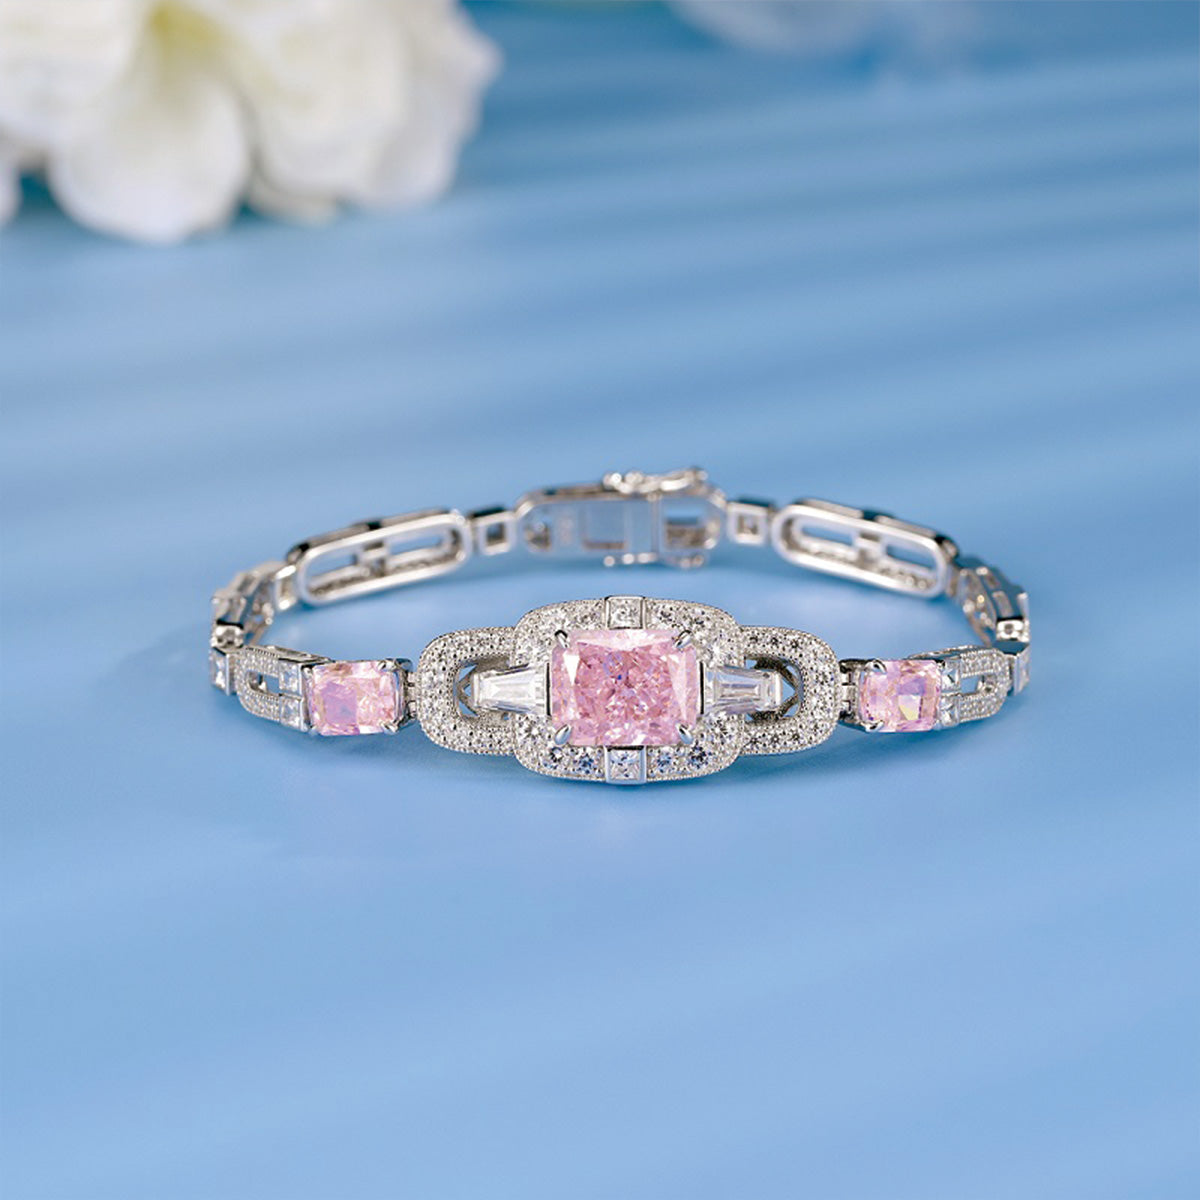 Sterling Silver Square Pink Sapphire with Channel Setting Stones Elegant Bracelet